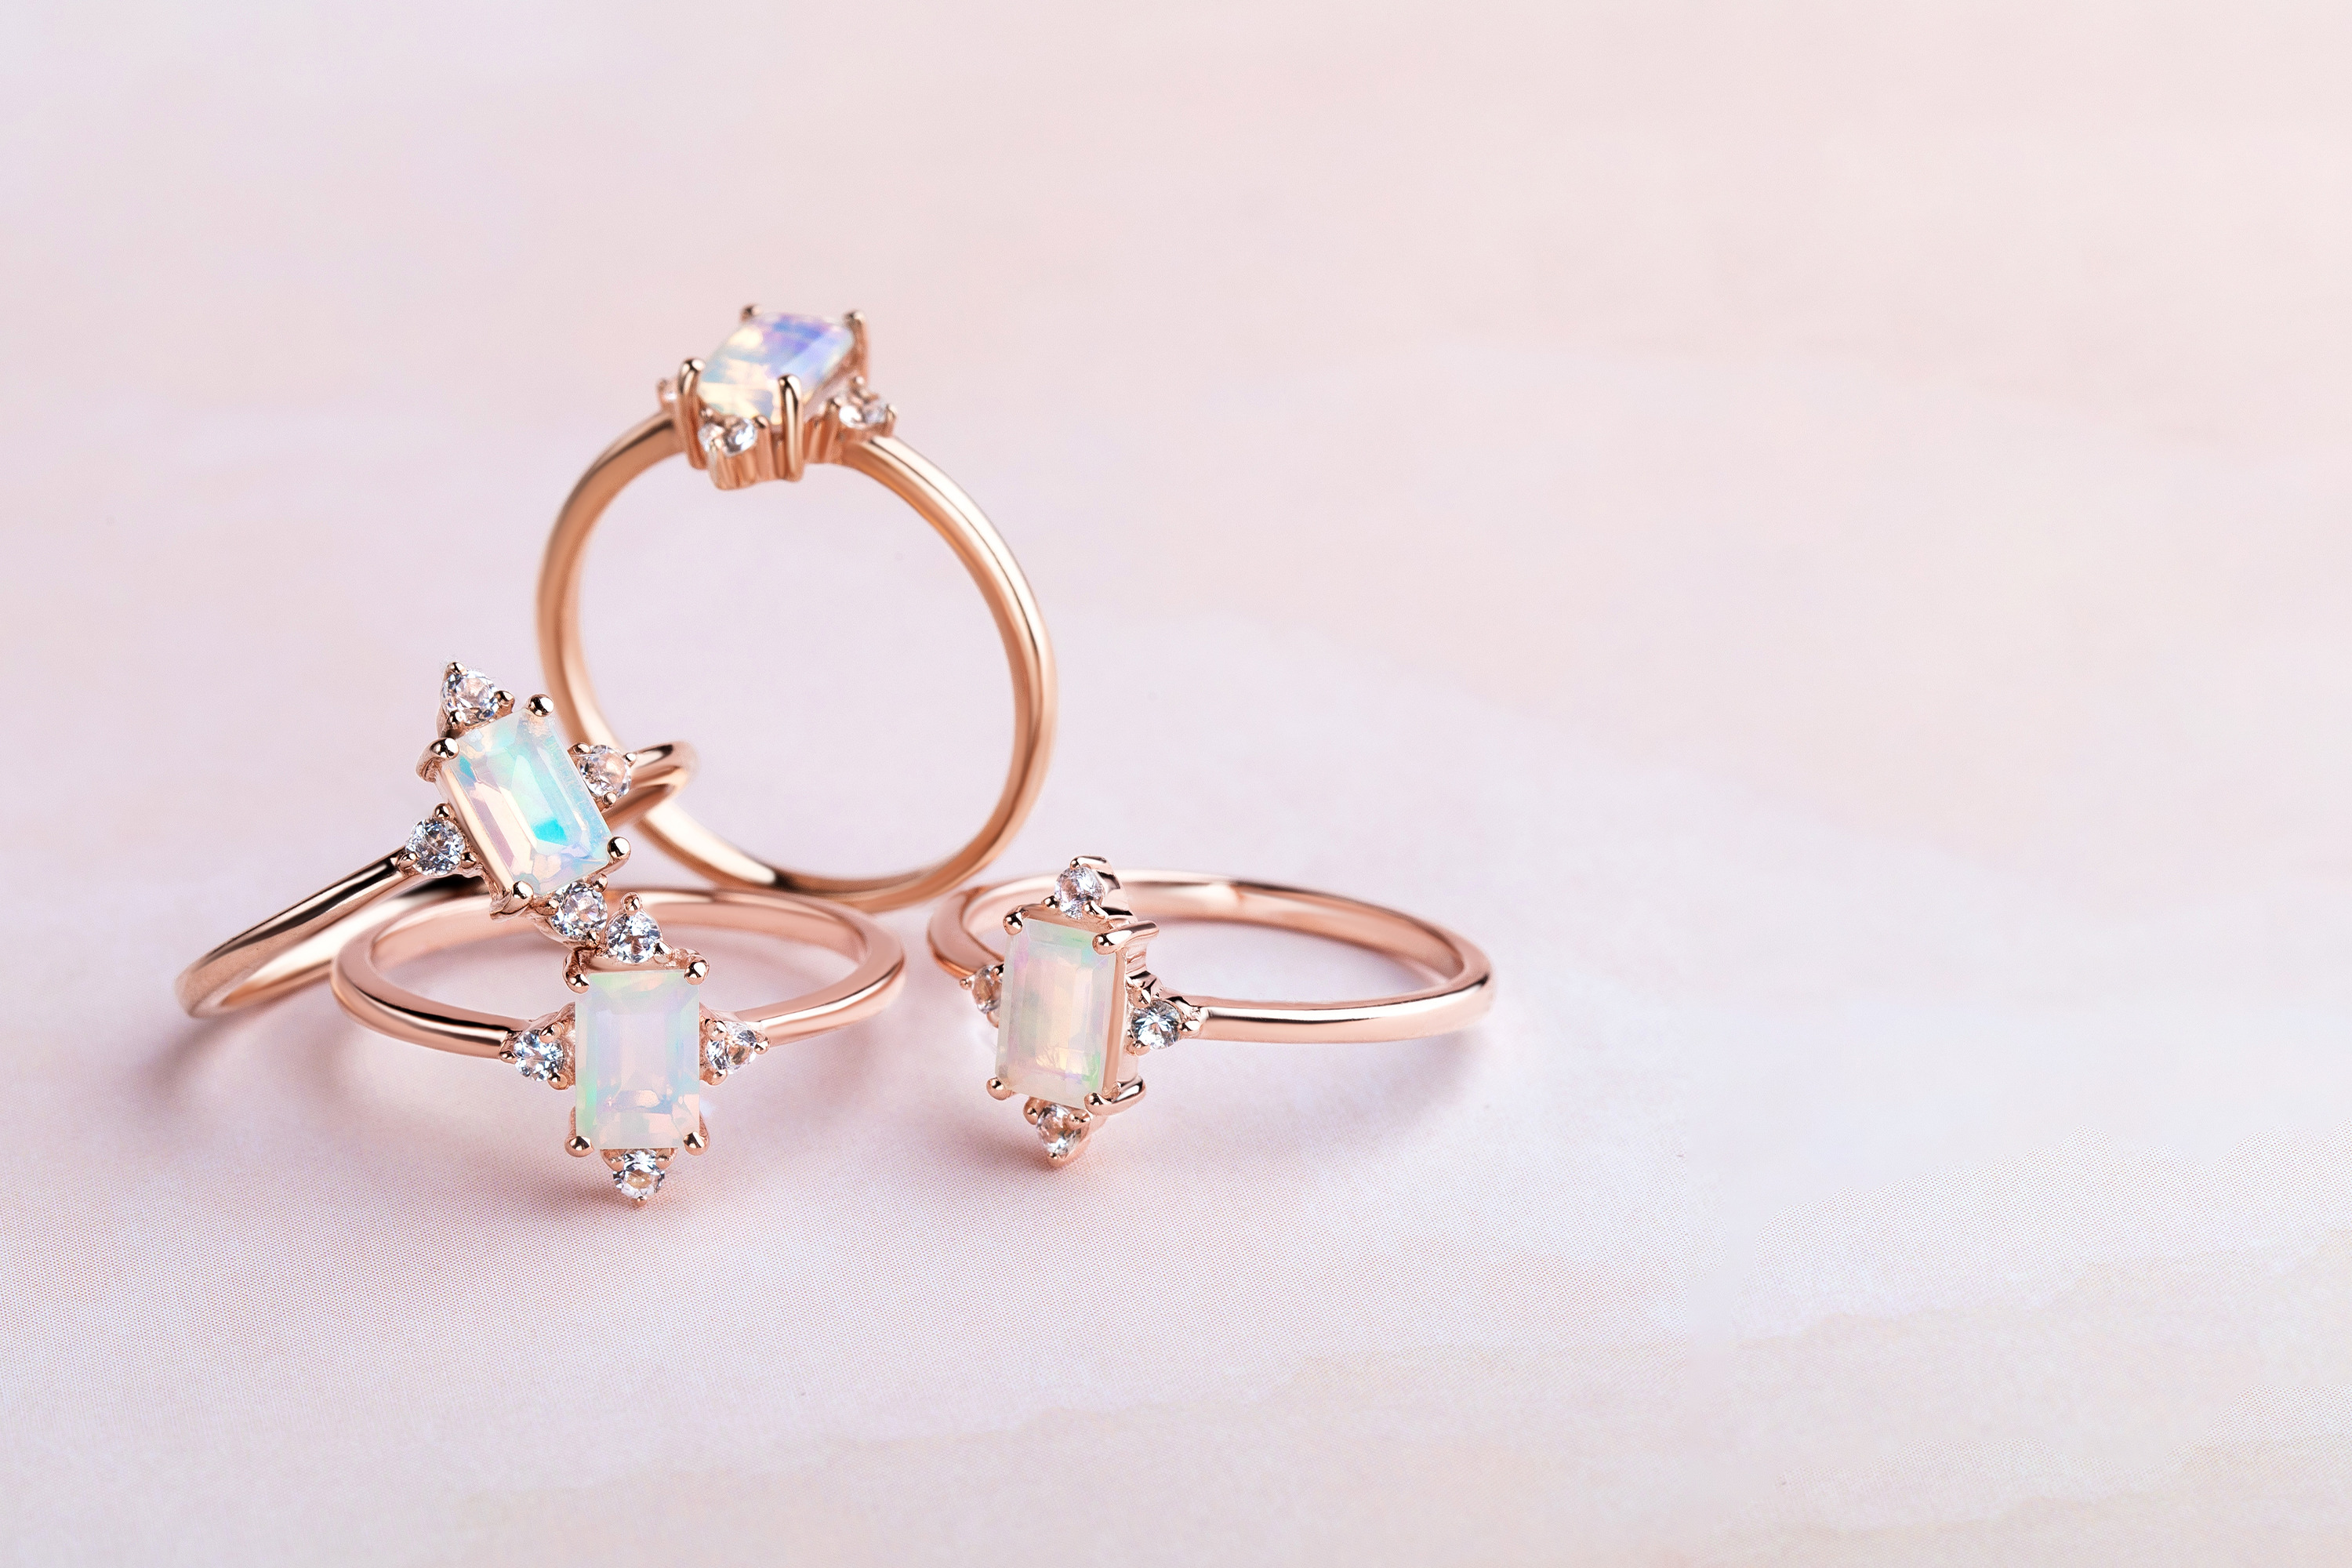 The Opal Ring Gracious in 14kt Rose Gold Vermeil is shown in different angles.